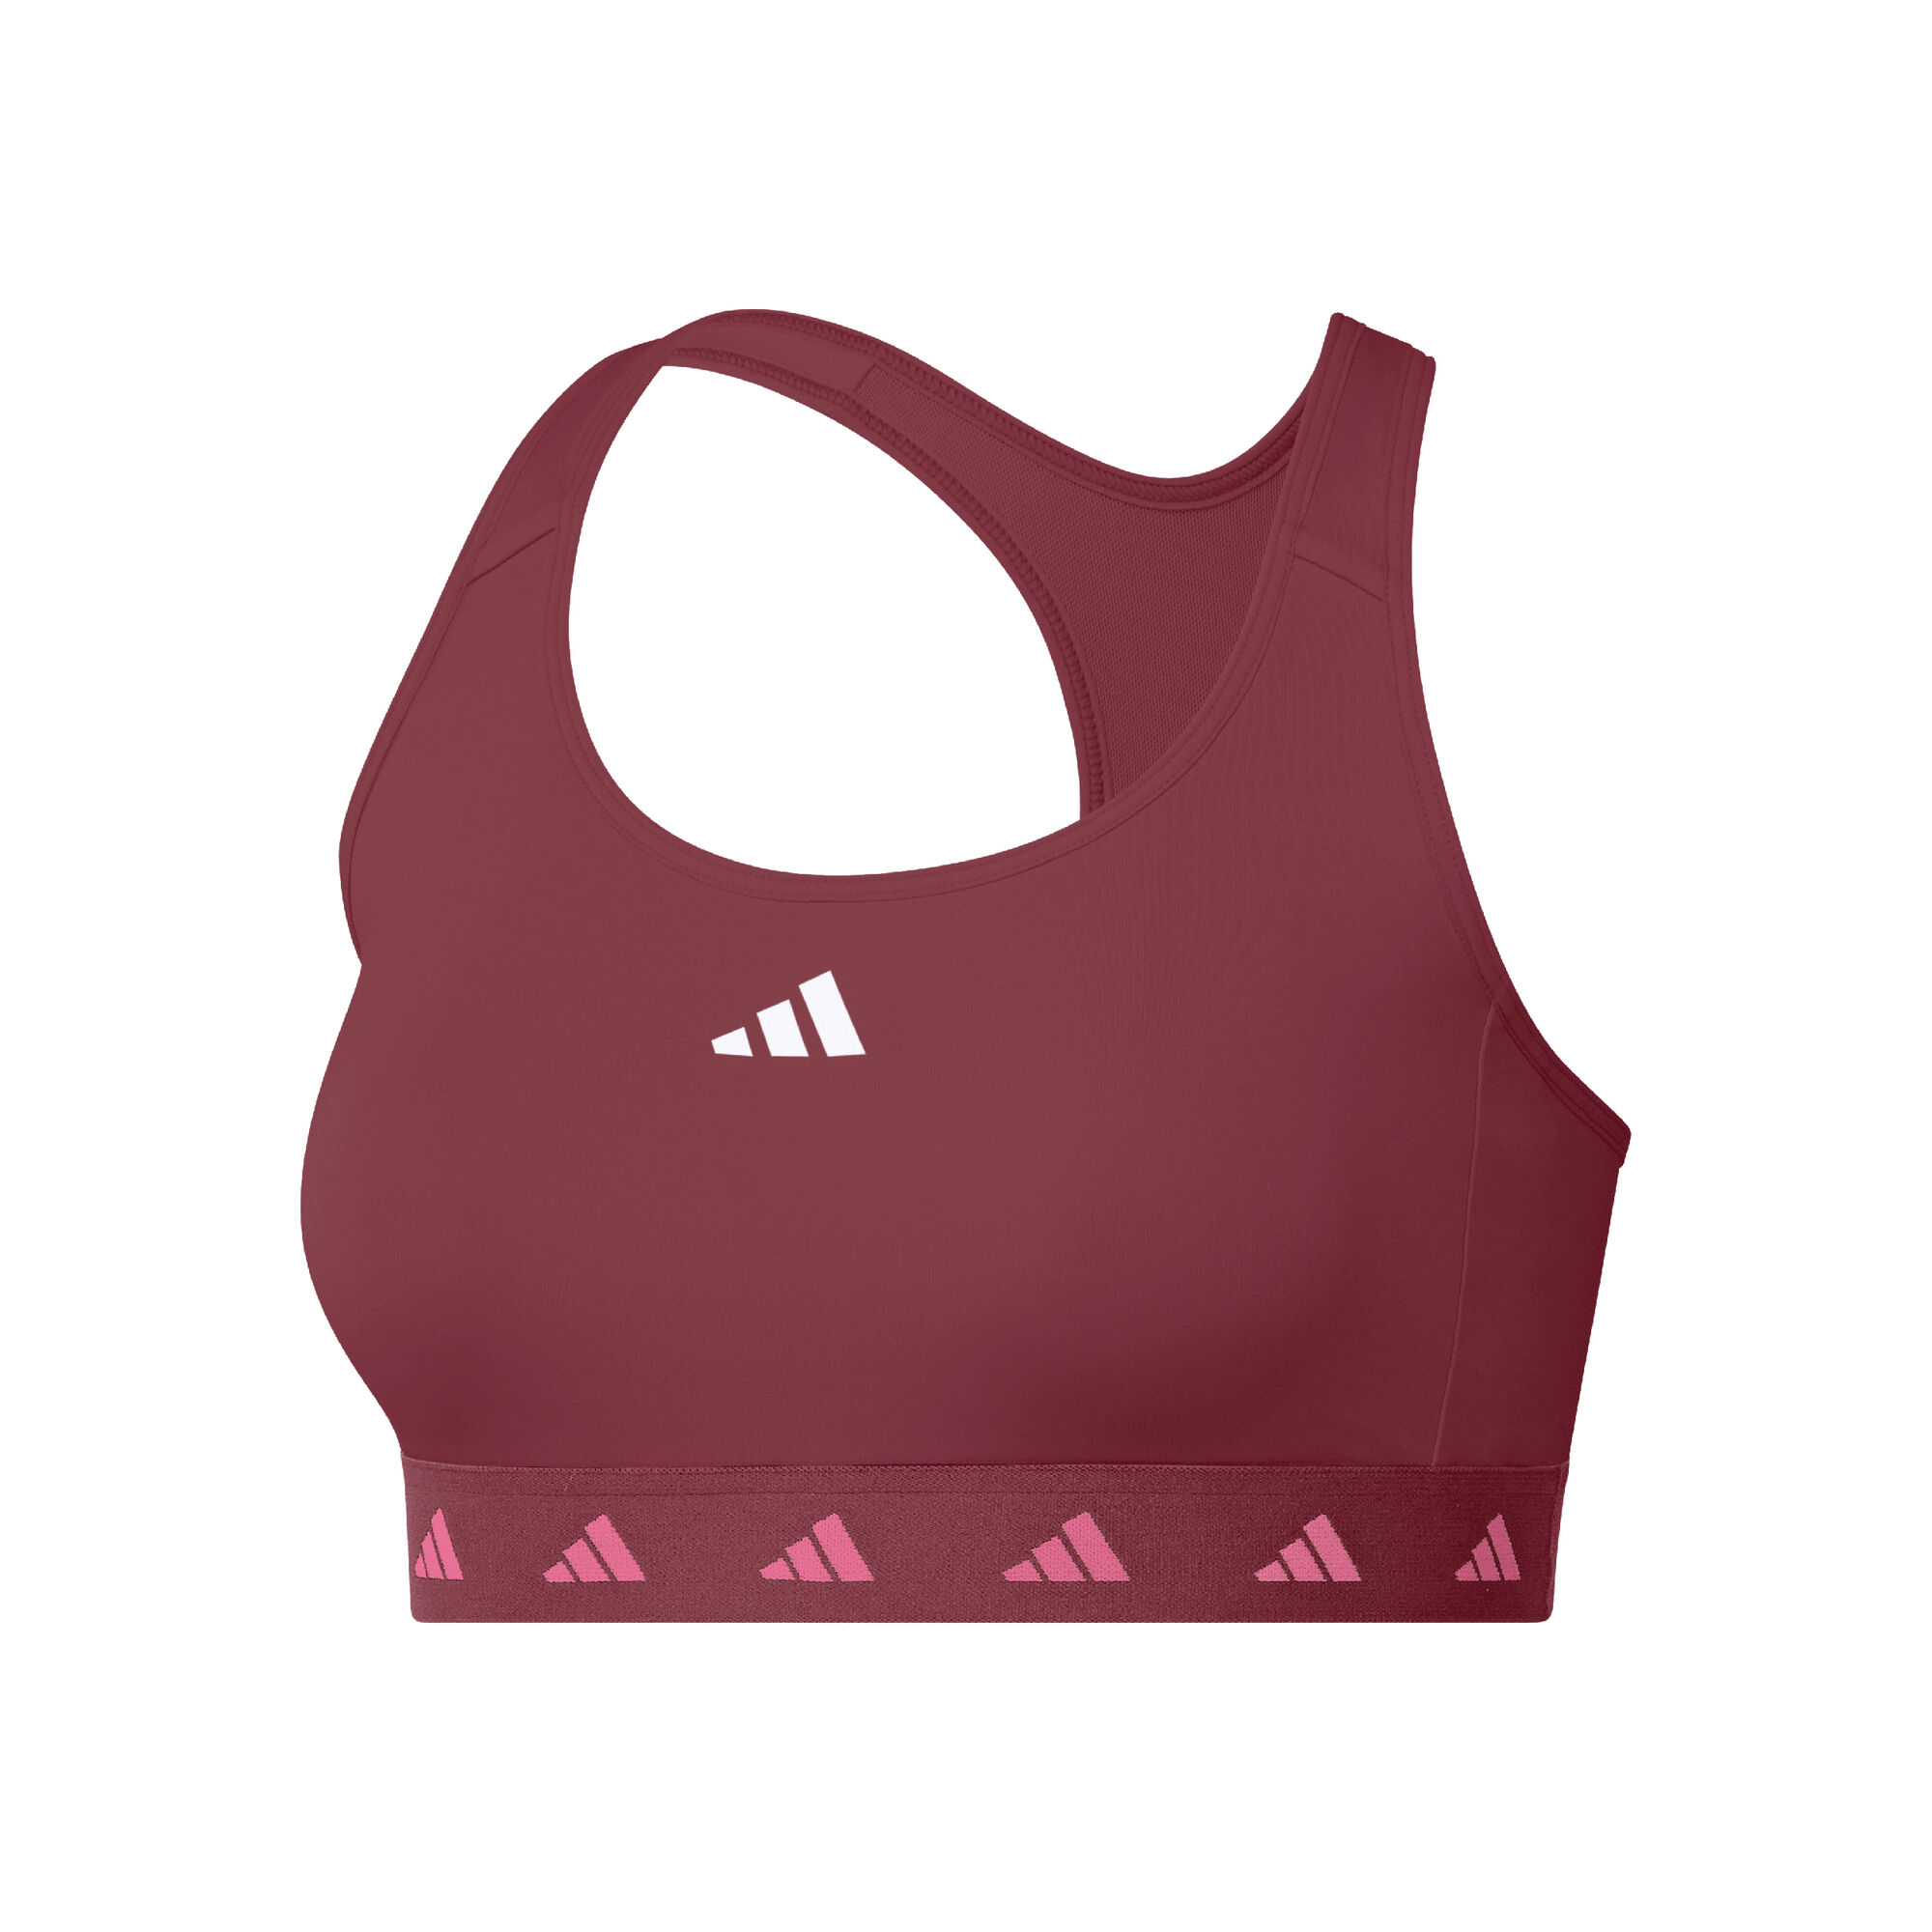 Red Adidas Techfit Womens Crop Top Sports Bra Size Small